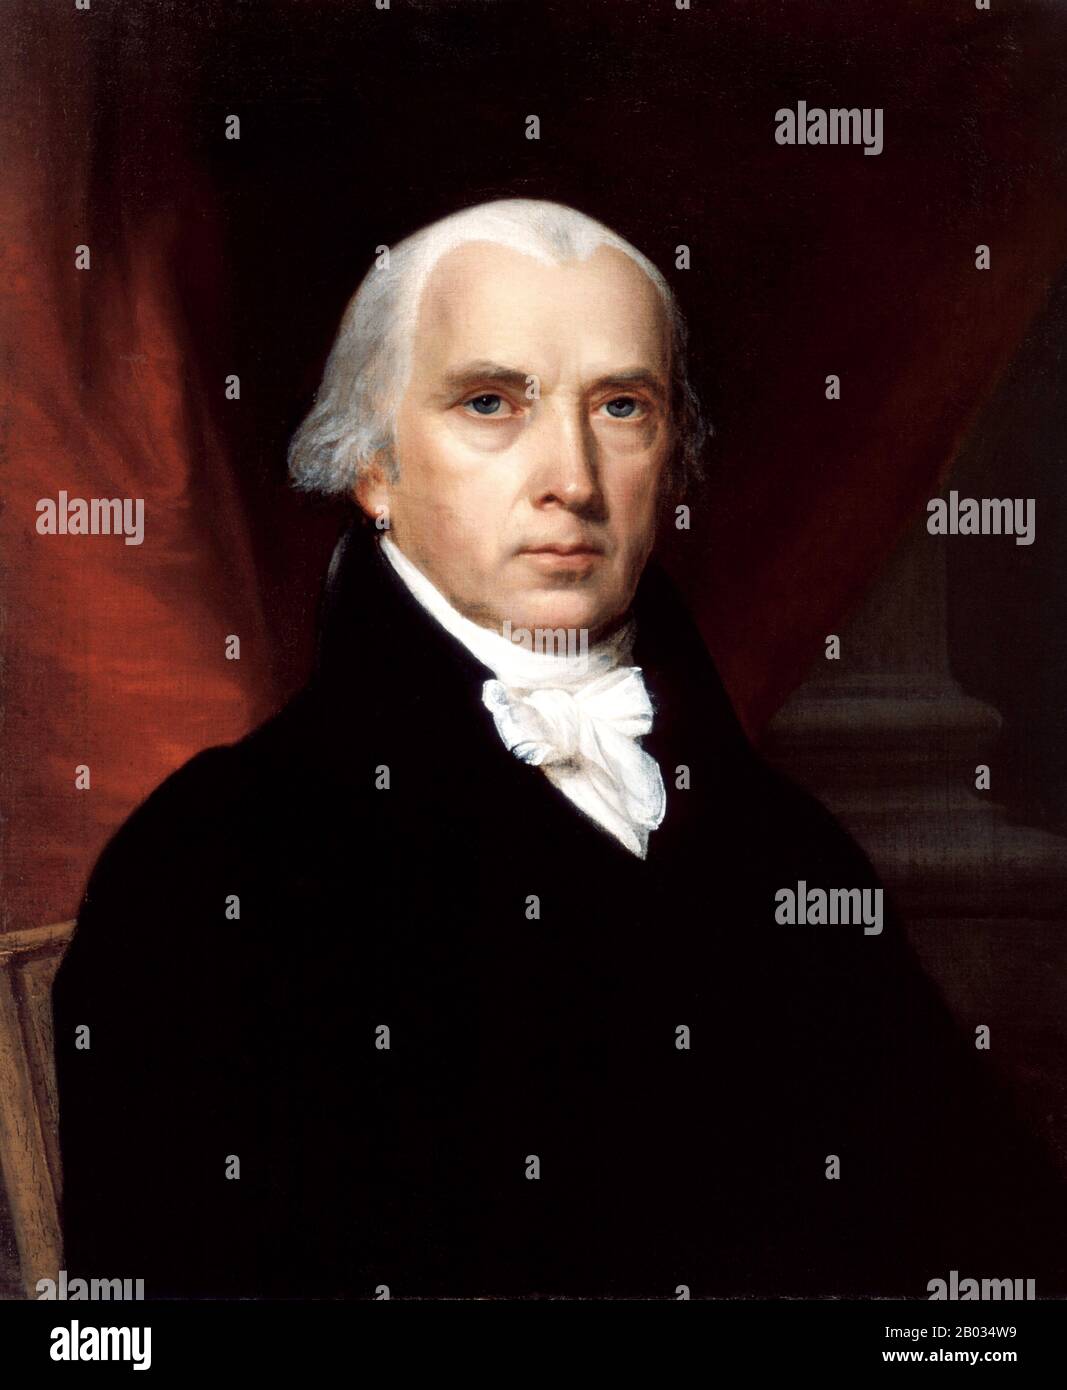 James Madison, Jr. (March 16, 1751 – June 28, 1836) was a political theorist, American statesman, and the fourth President of the United States (1809–17).  He is hailed as the 'Father of the Constitution' for his pivotal role in drafting and promoting the U.S. Constitution and the Bill of Rights. Stock Photo